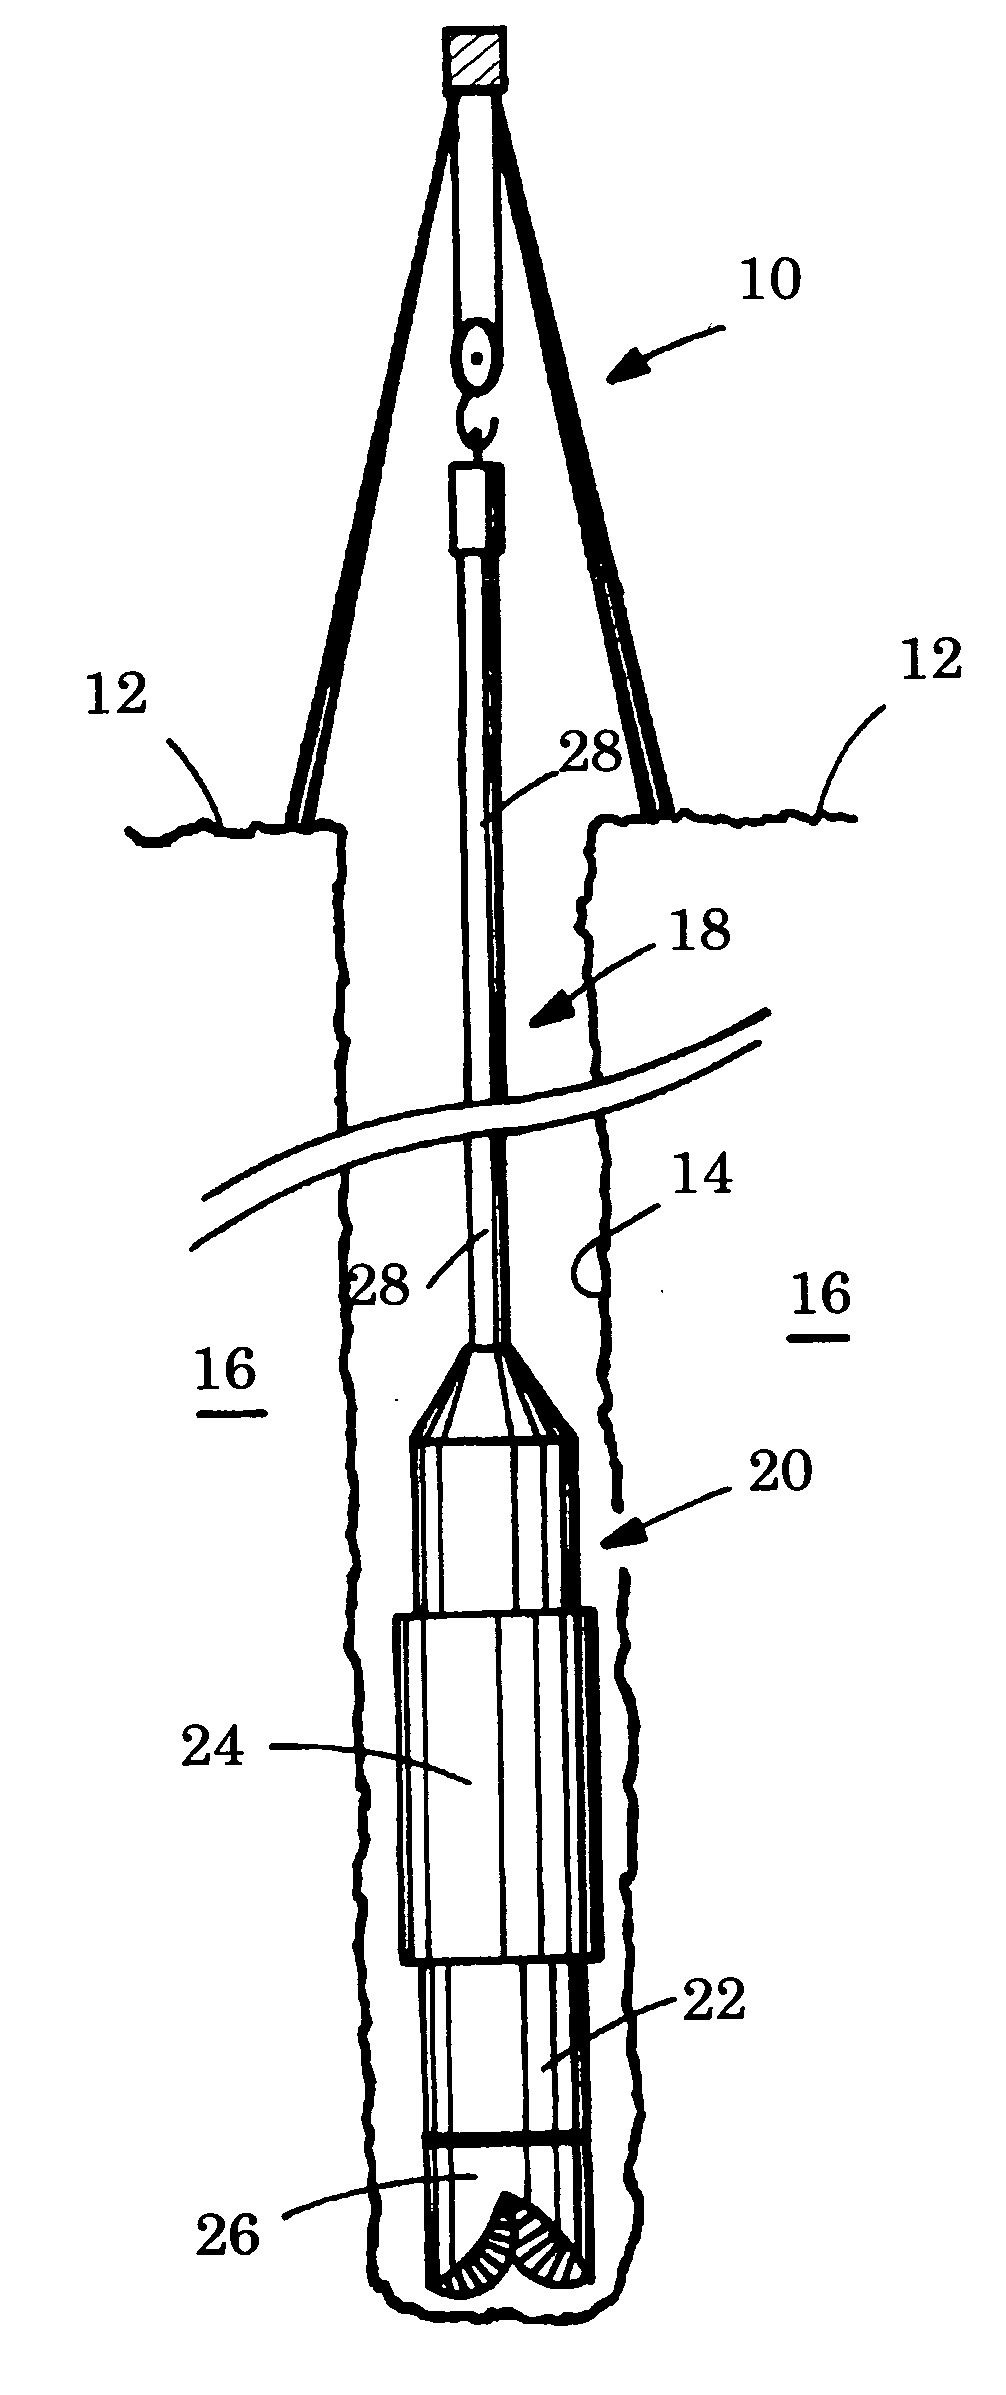 Logging tool with a parasitic radiation shield and method of logging with such a tool